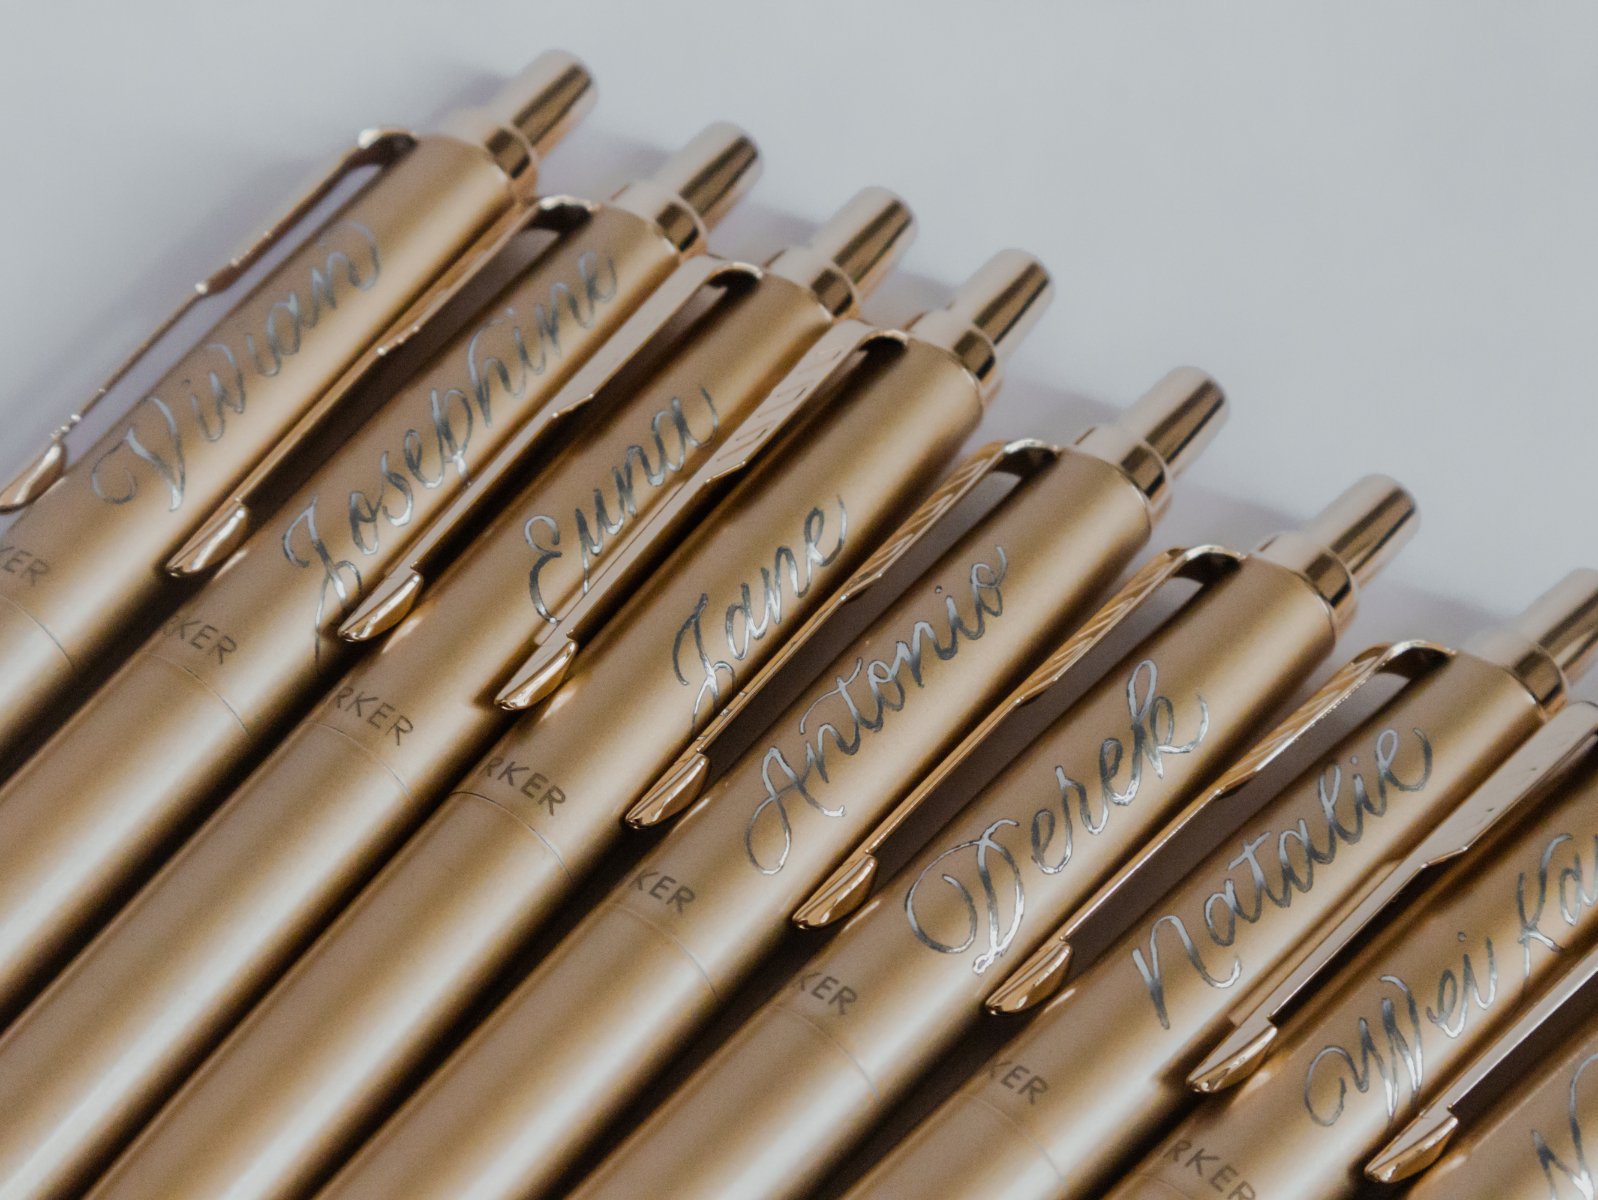 First Name Calligraphy Engraving on Parker Pens for Bloomberg 8.jpg